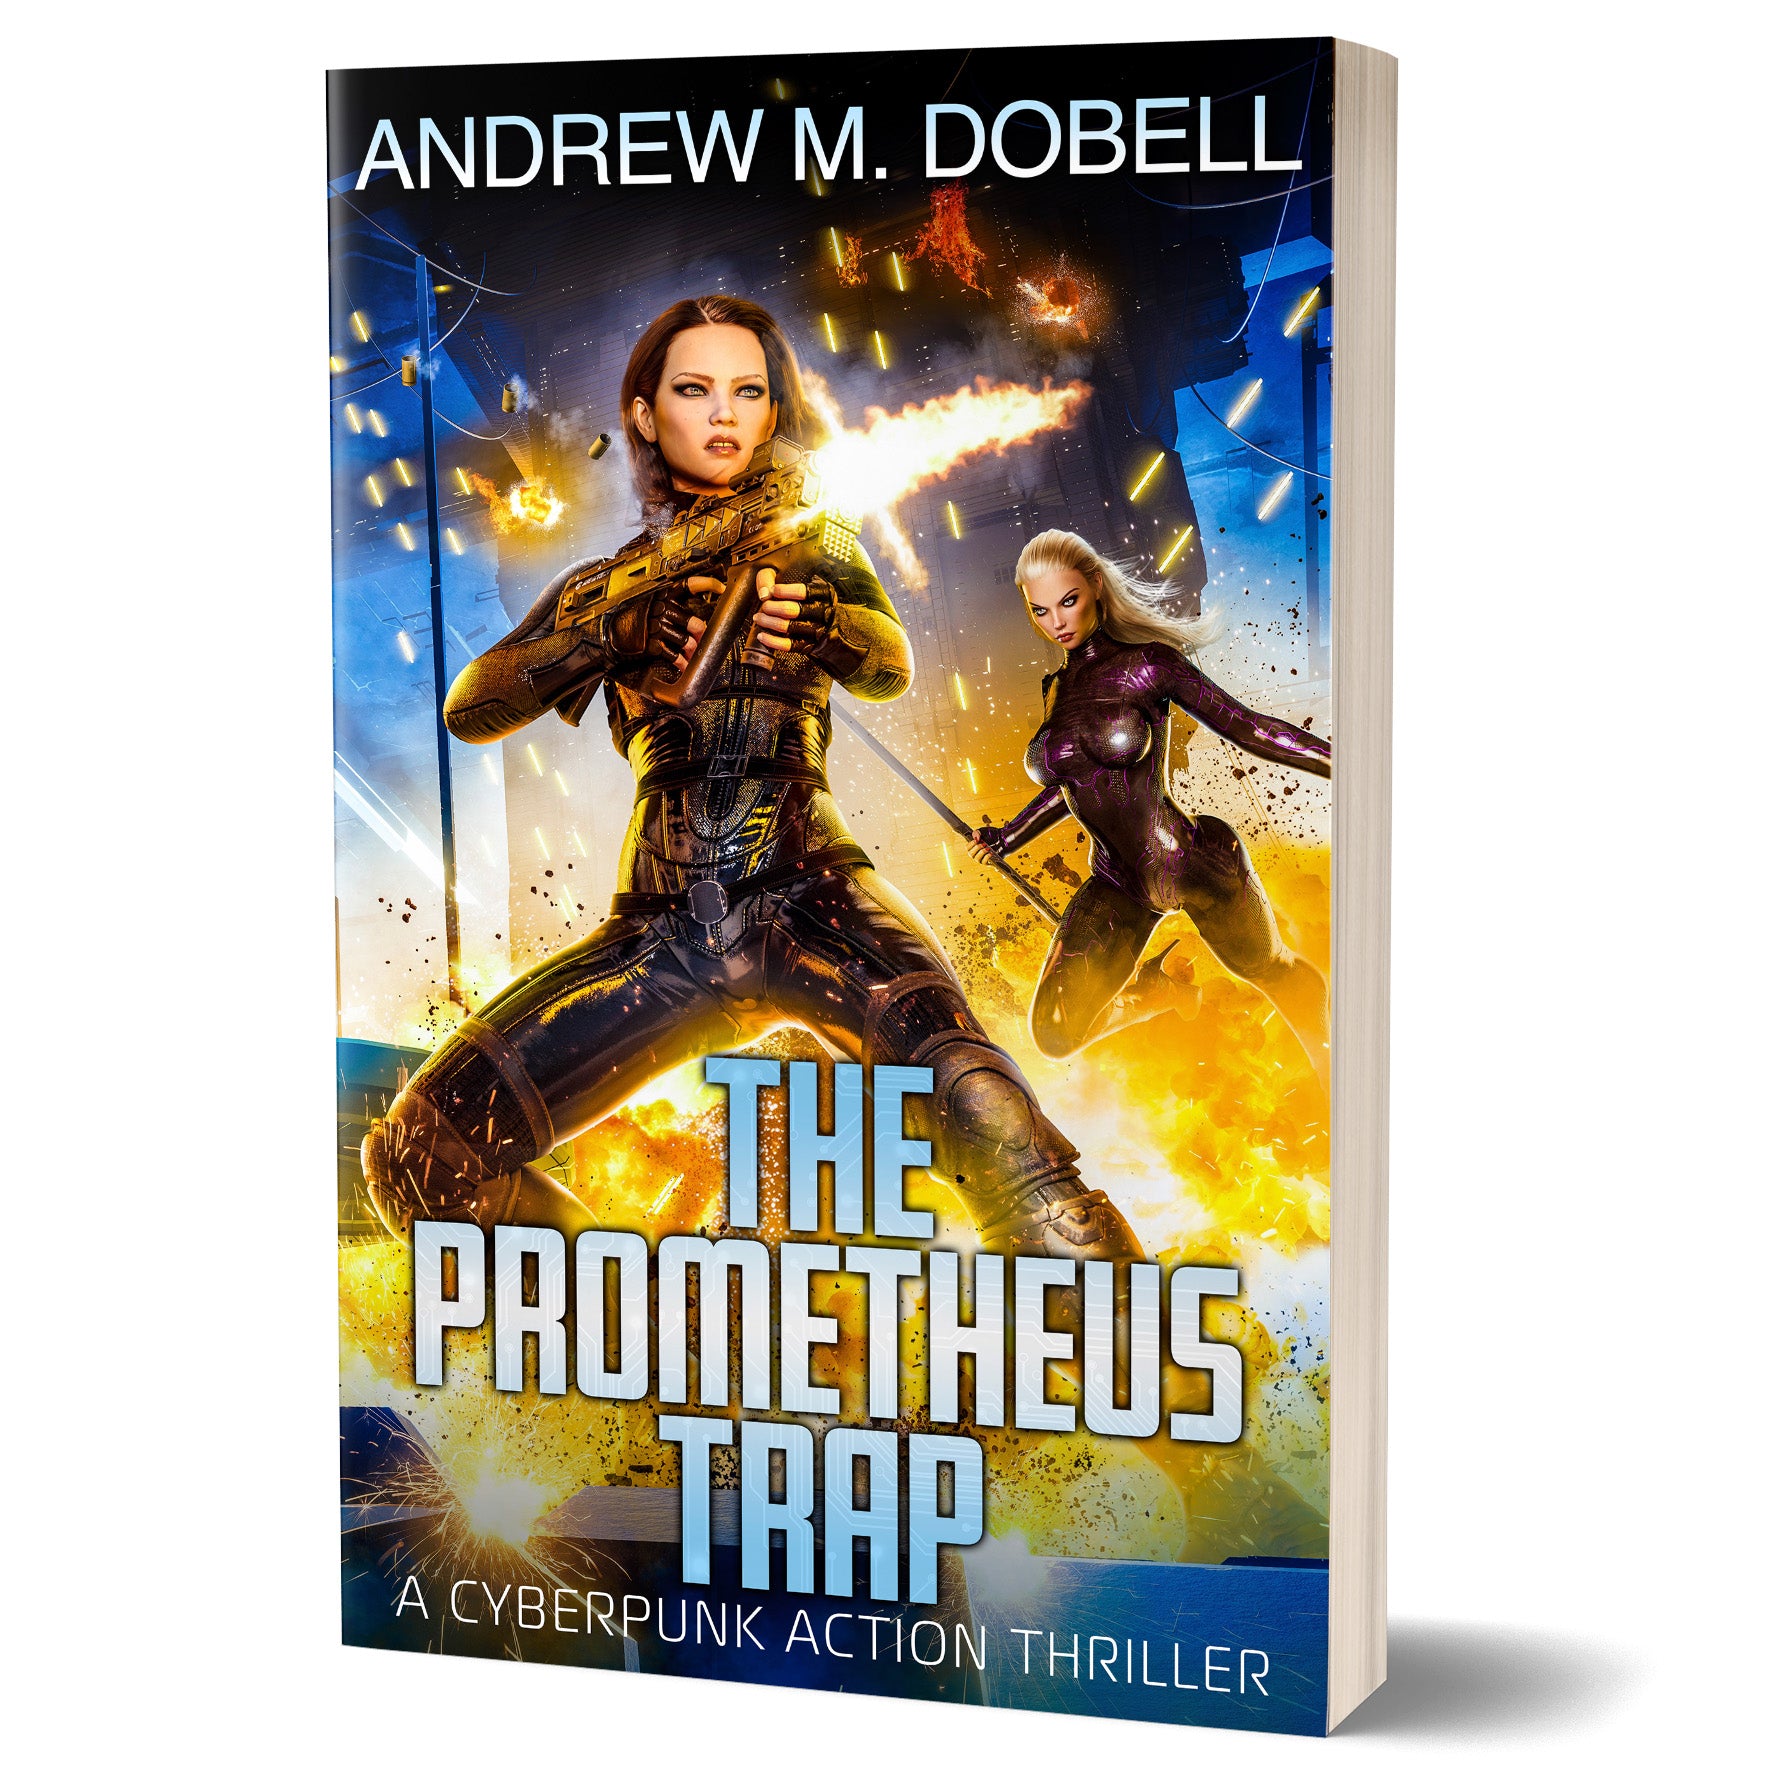 The Prometheus Trap, a cyberpunk action thriller series.